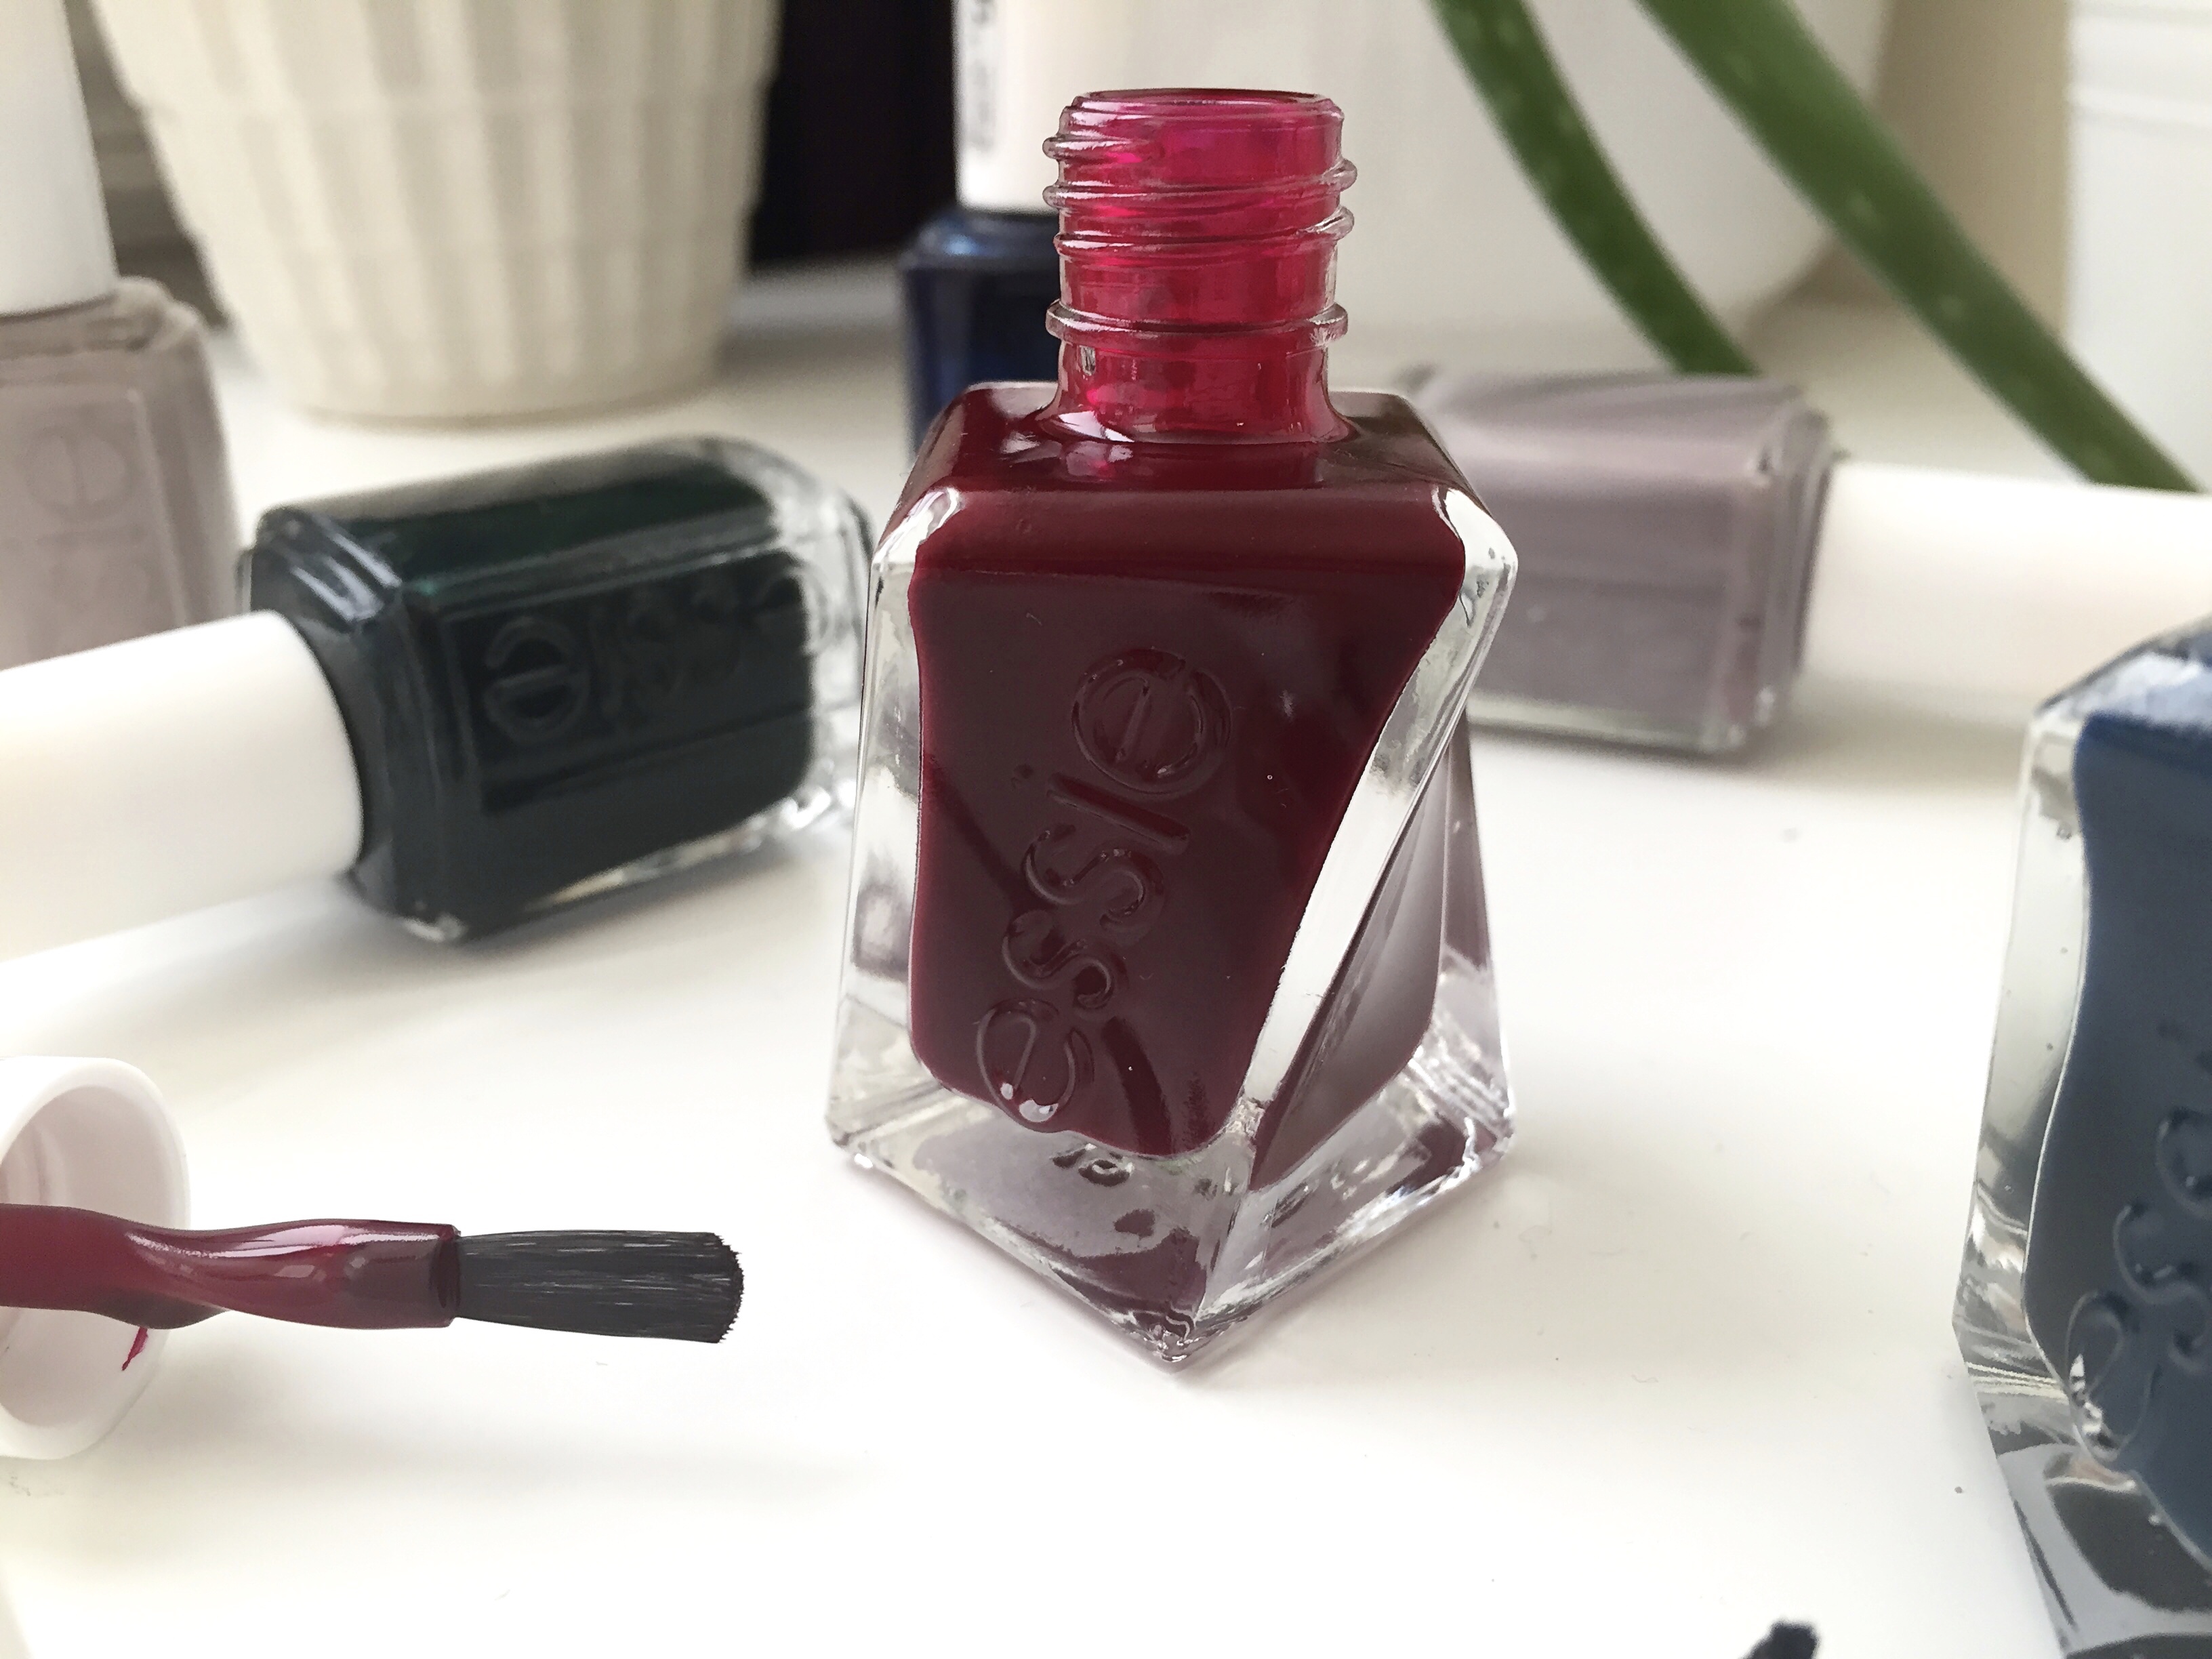 Little Essie Gel Couture Haul - Born To Be Bright